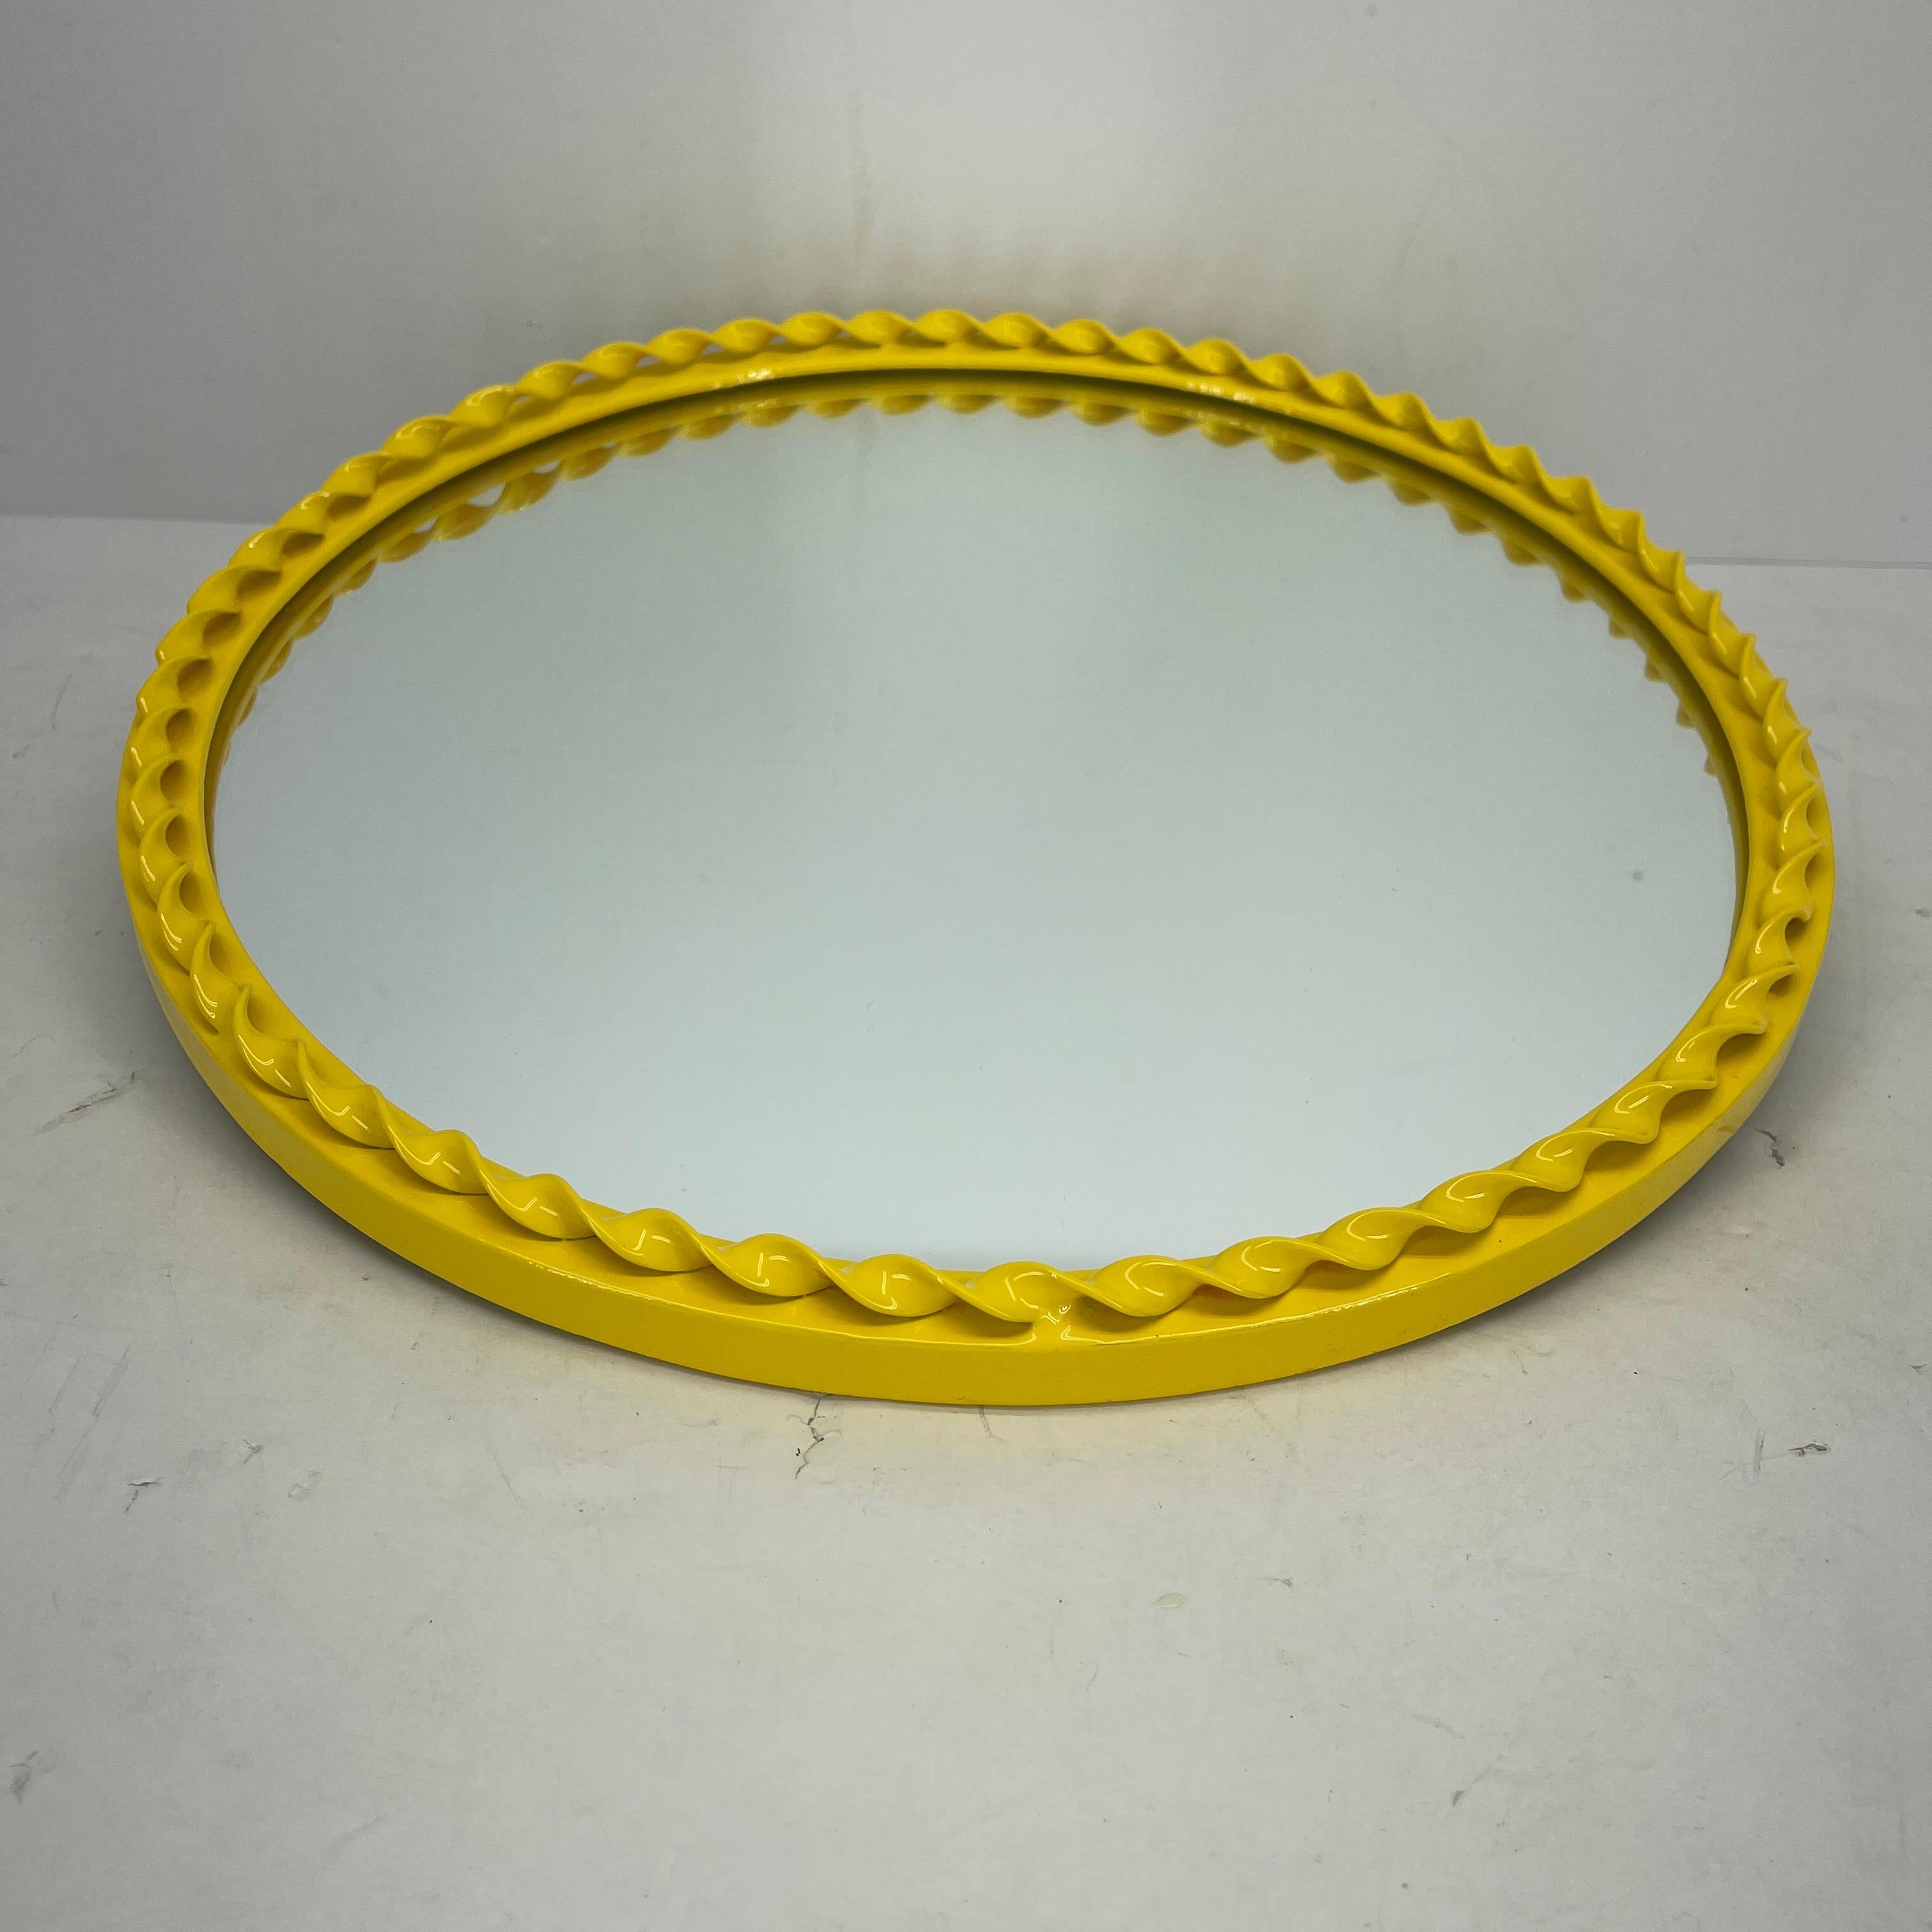 Round Mid-Century Modern bright yellow powder coated metal wall mirror.
The mirror is newly powder-coated.